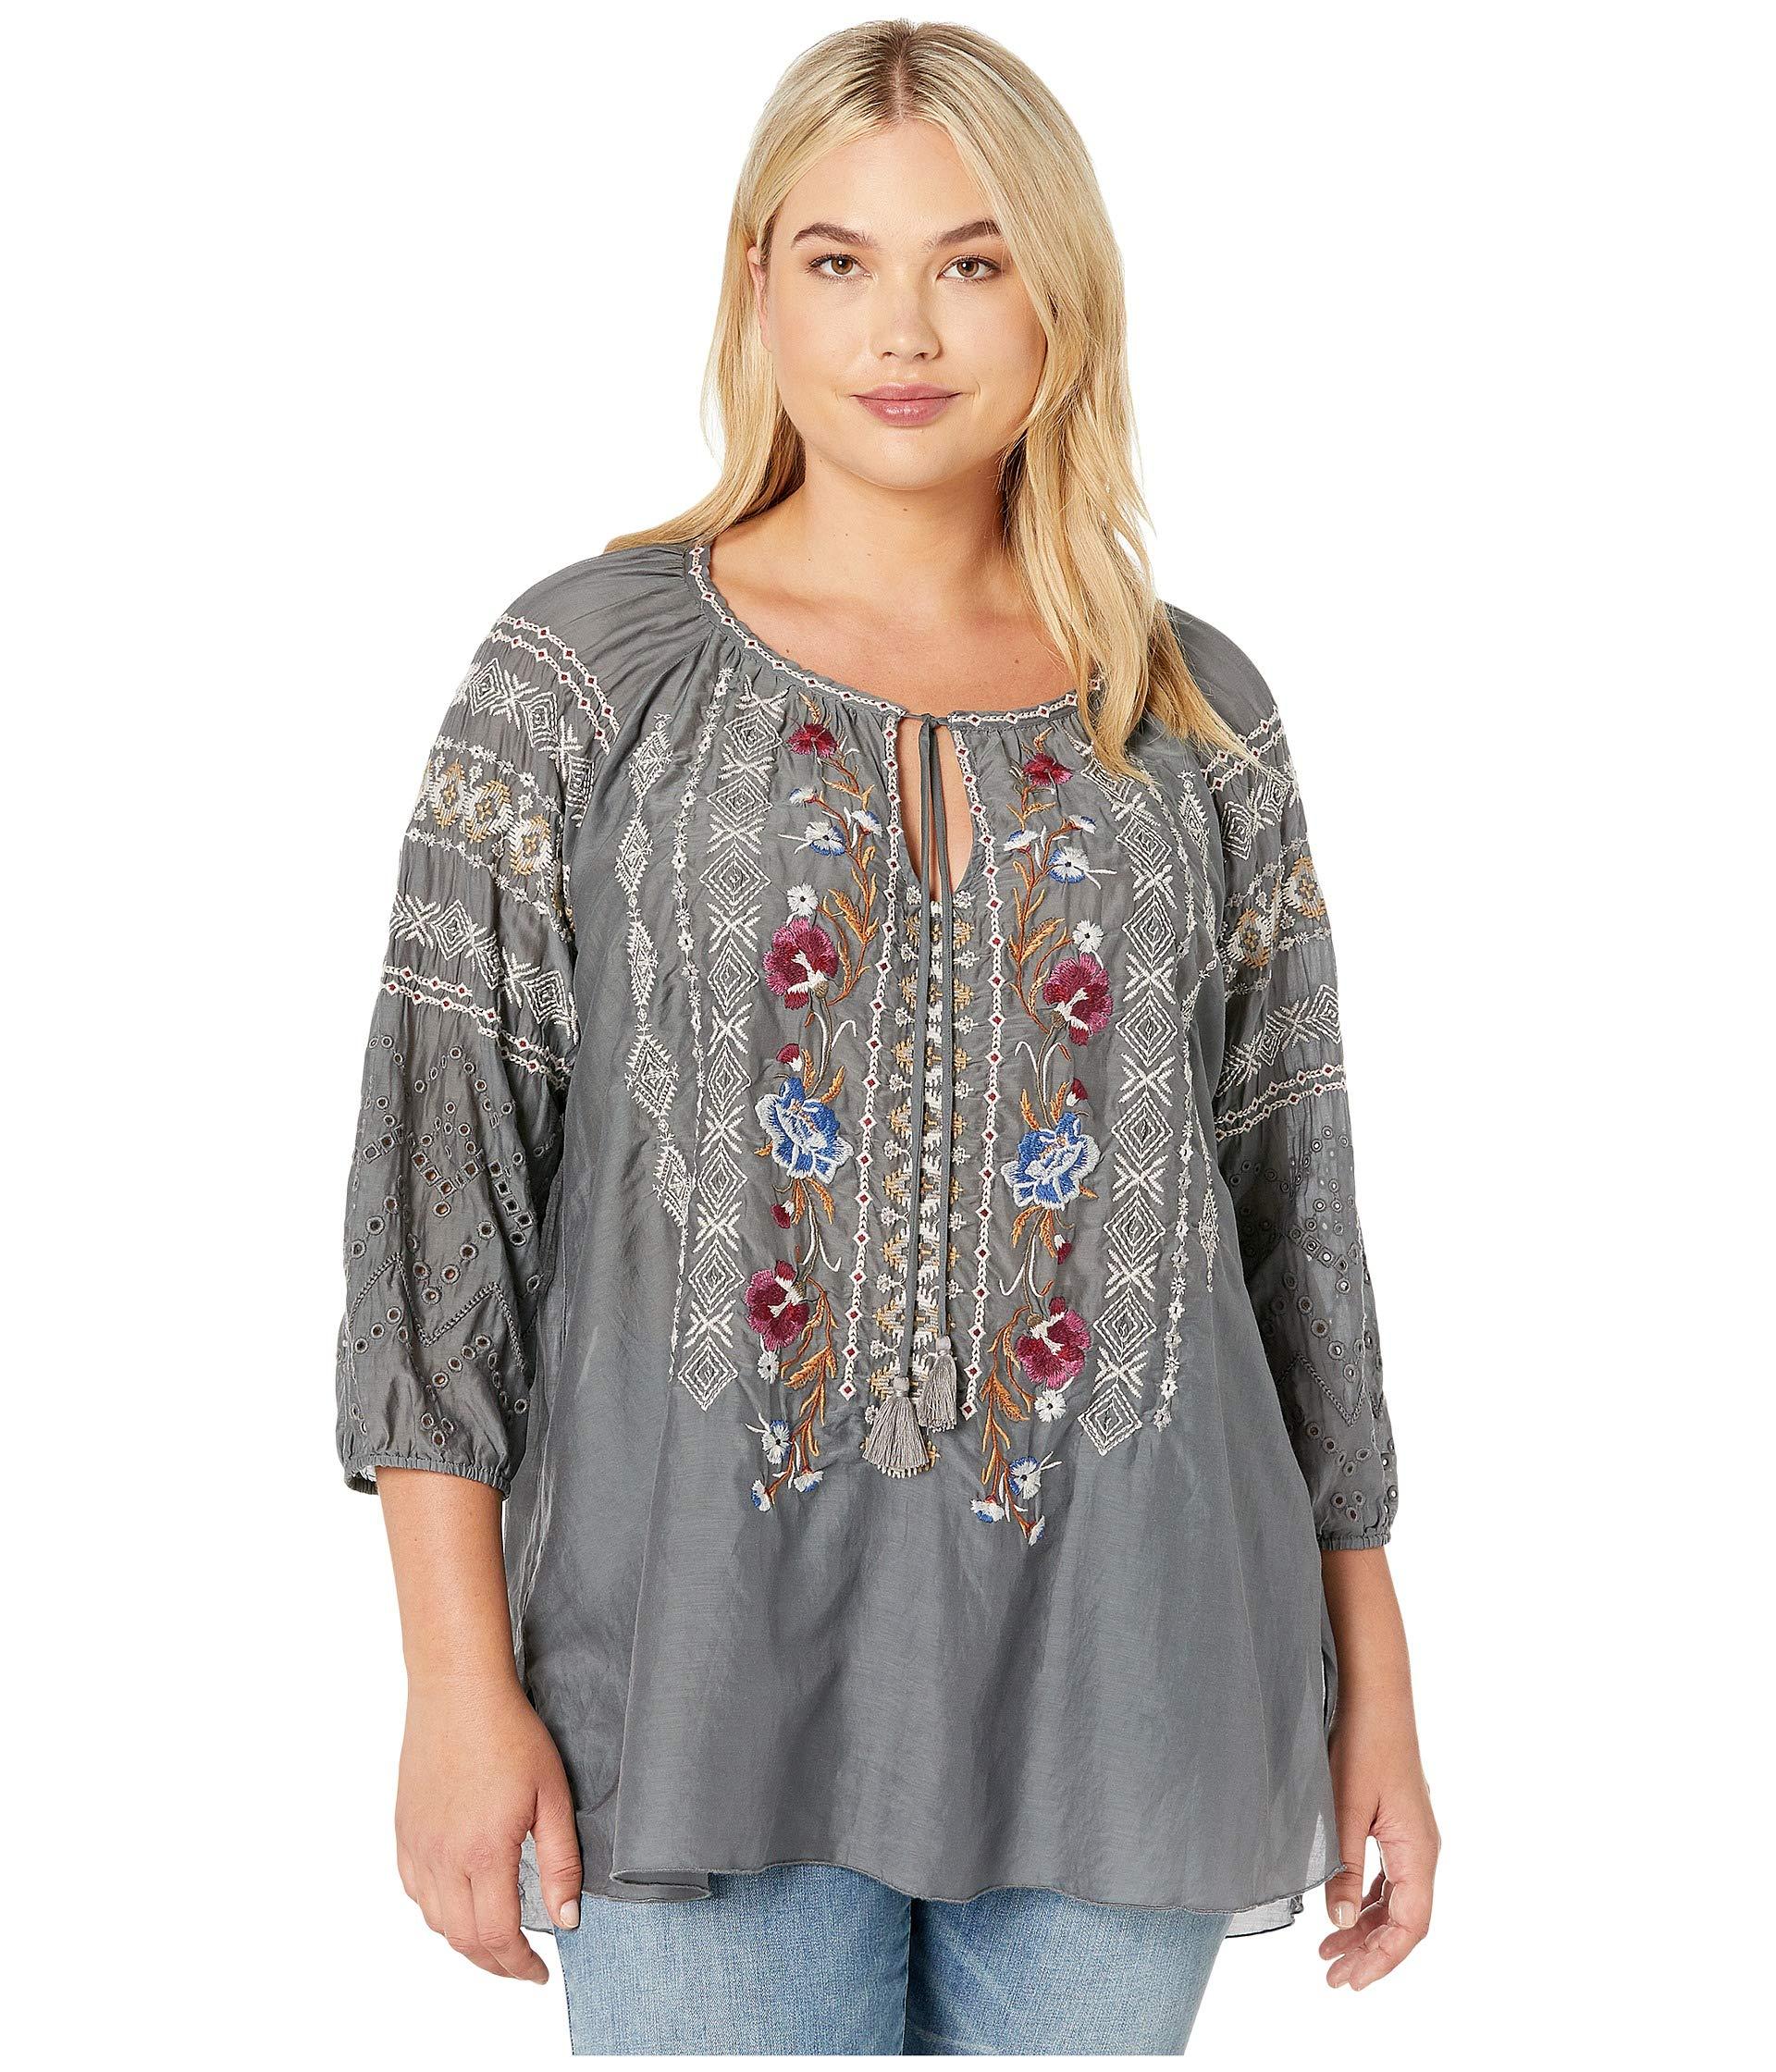 Johnny Was Cotton Plus Size Angelique Eyelet Peasant Blouse in Gray - Lyst